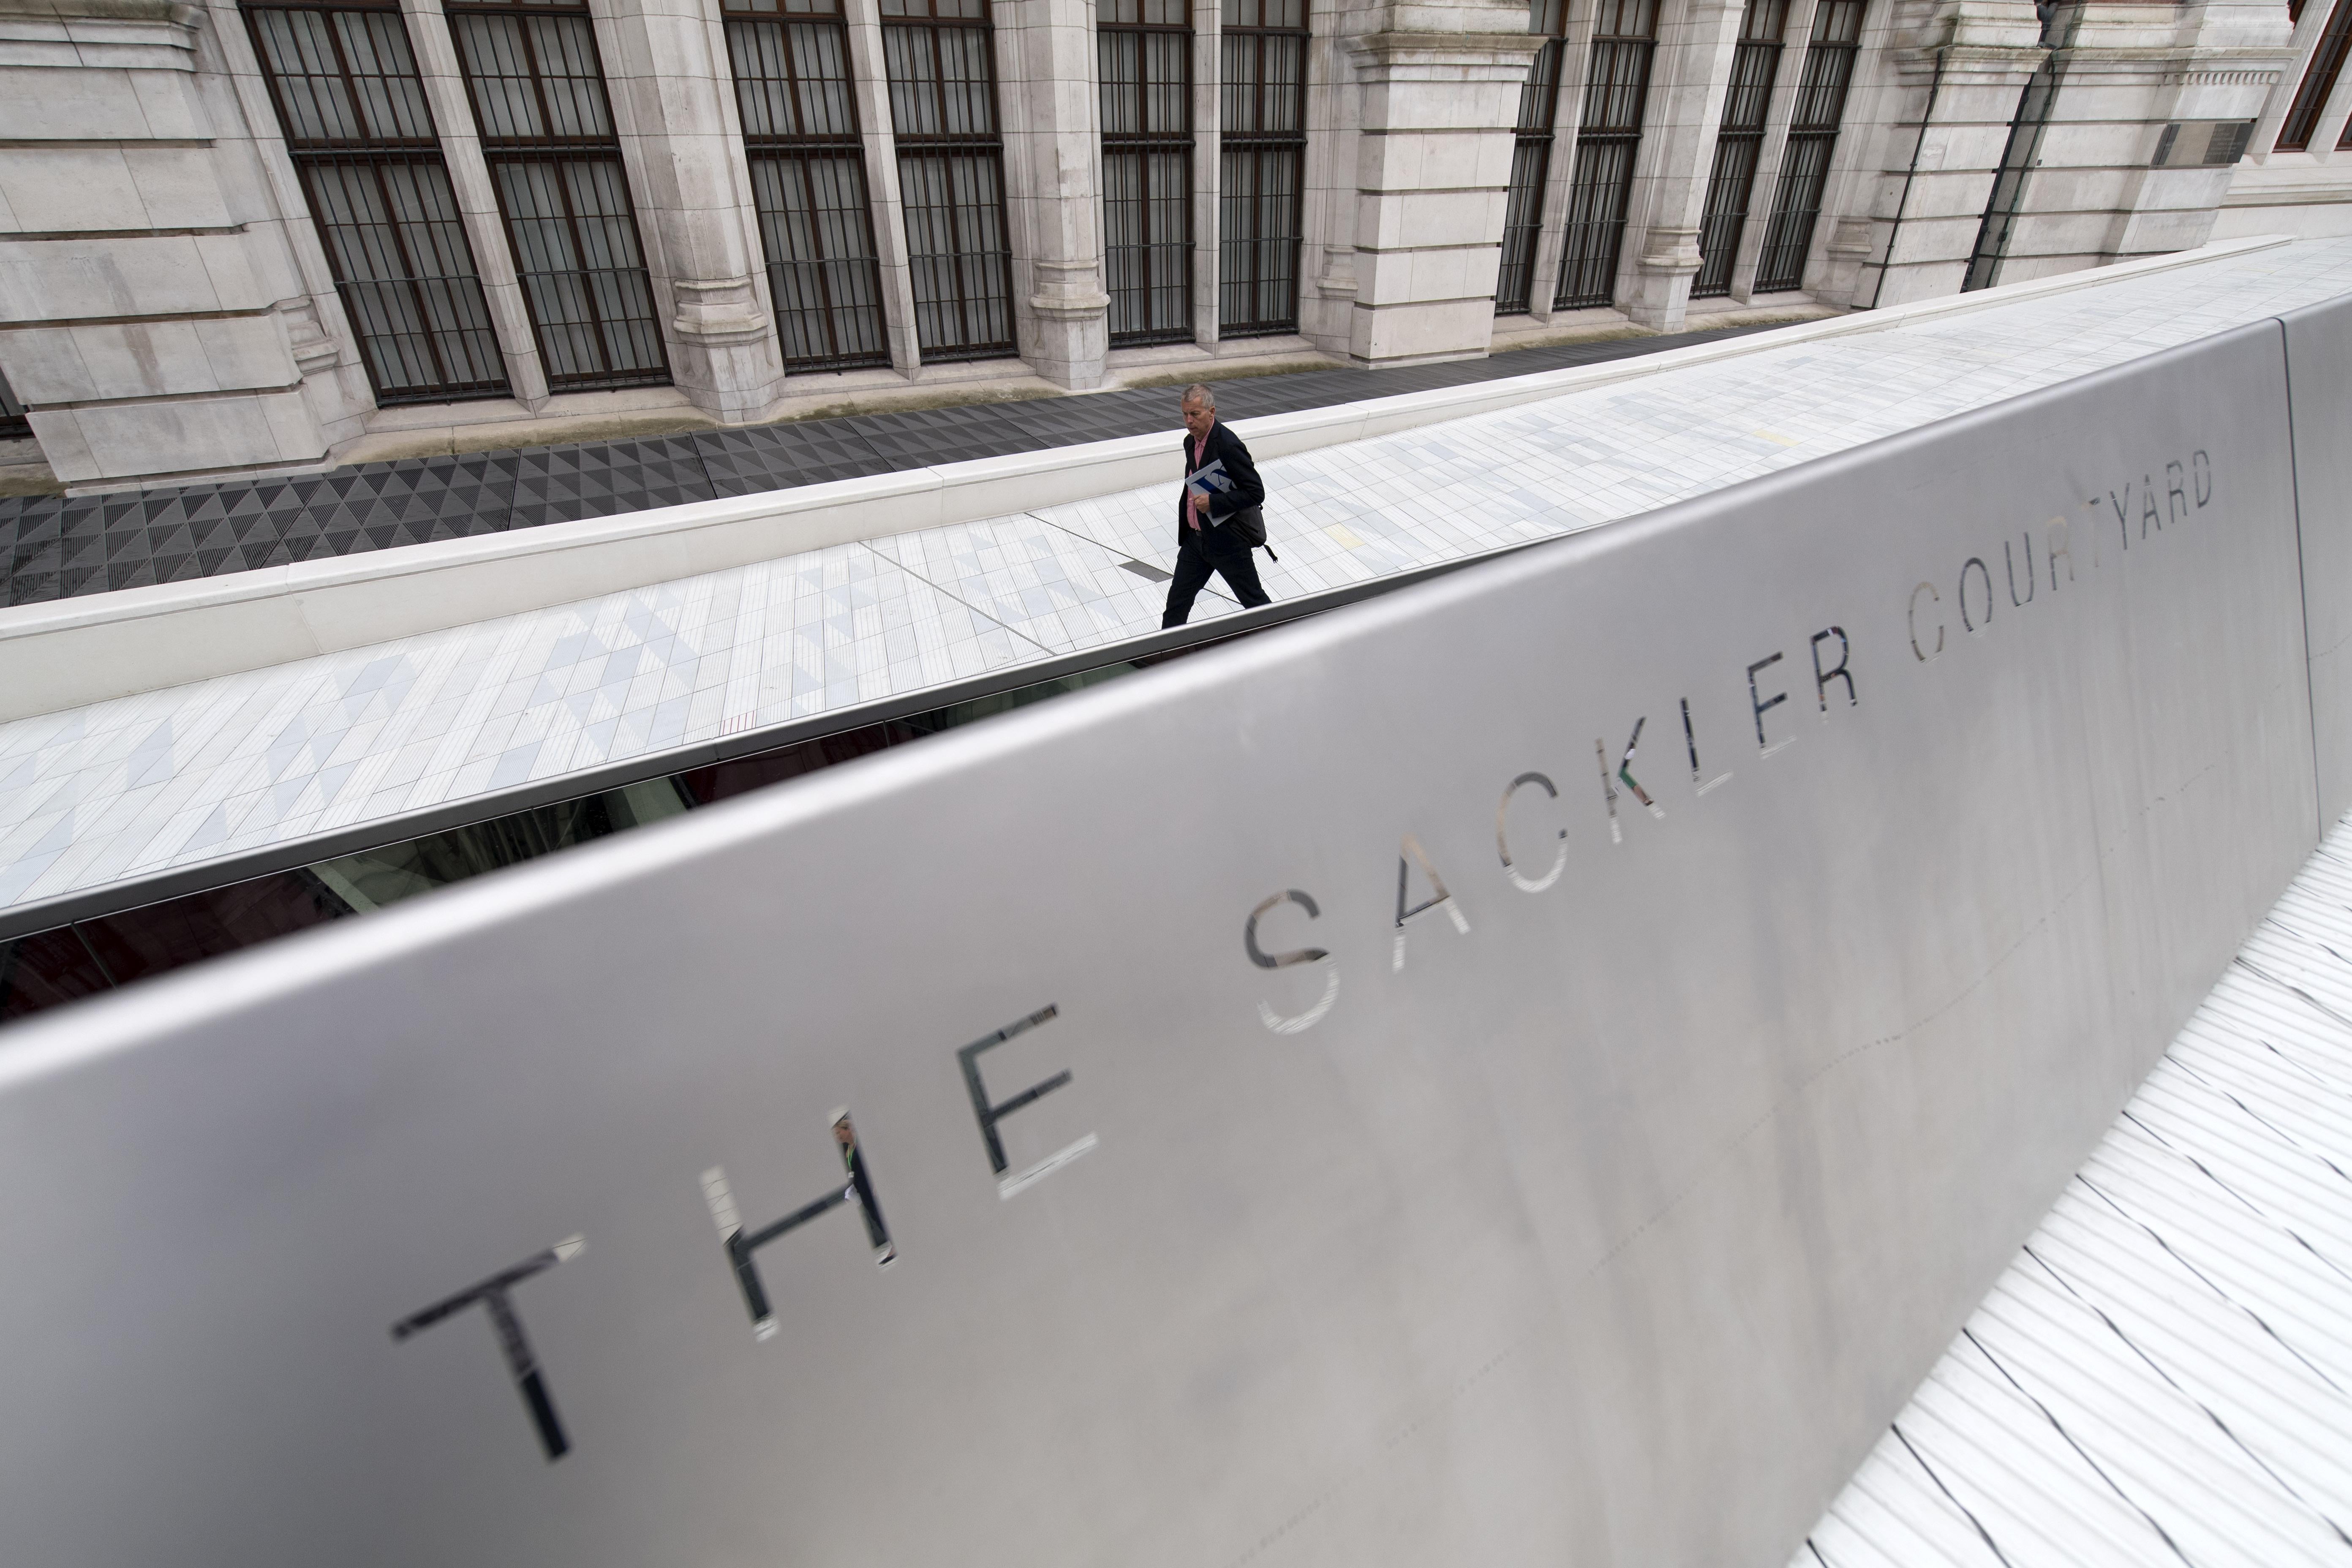 The words "The Sackler Courtyard" can be seen on a low wall in front of white plaza. 